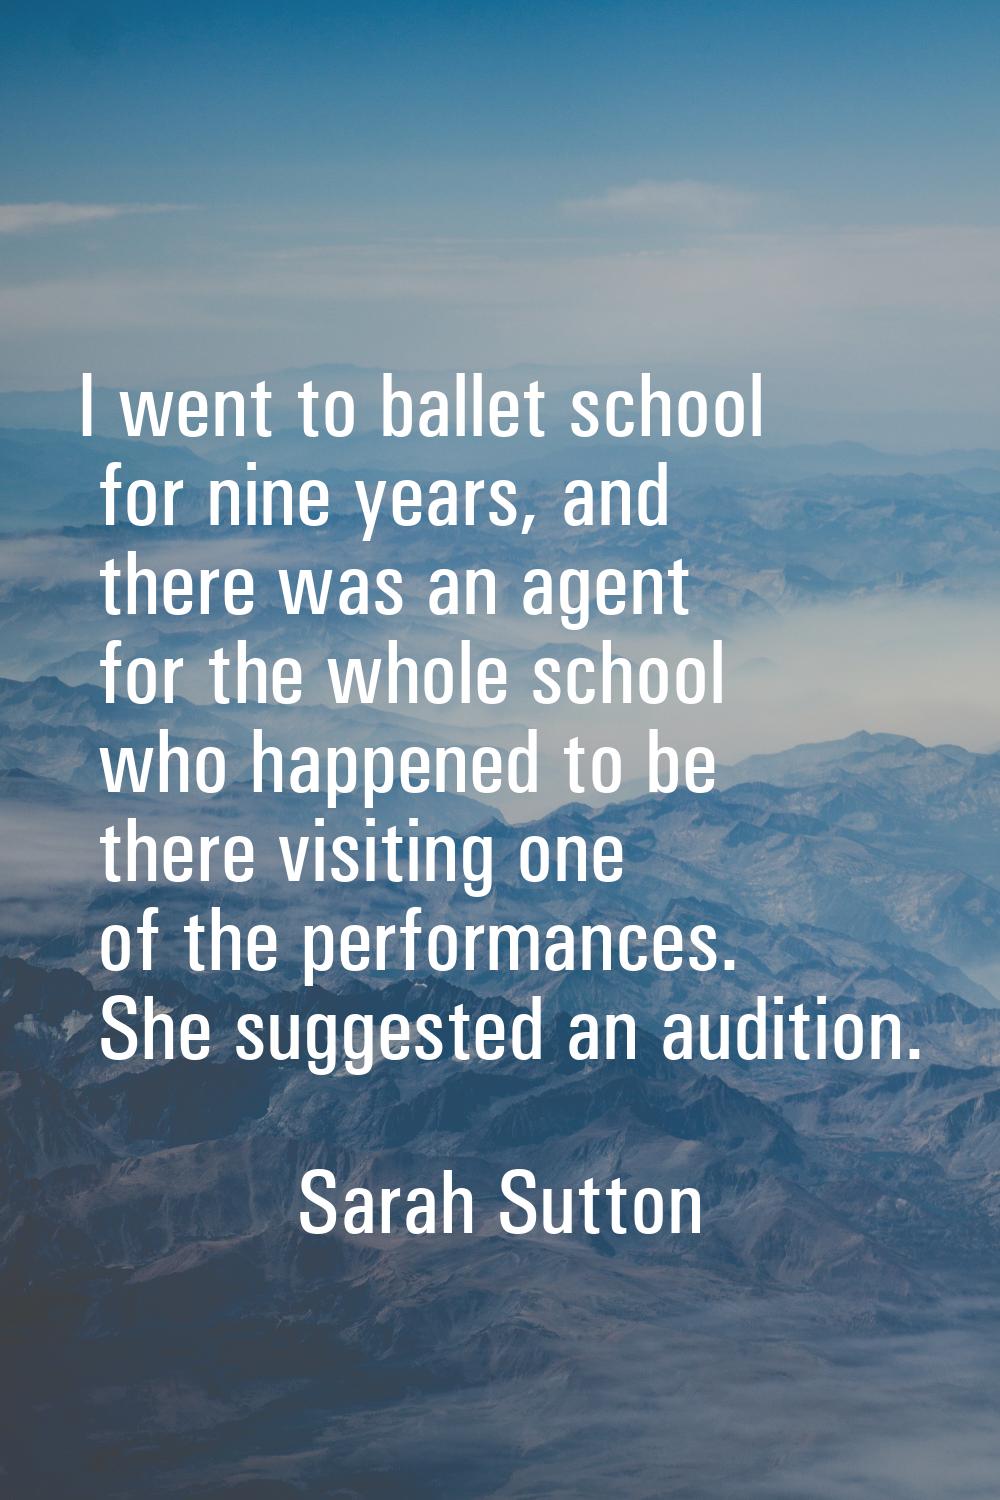 I went to ballet school for nine years, and there was an agent for the whole school who happened to